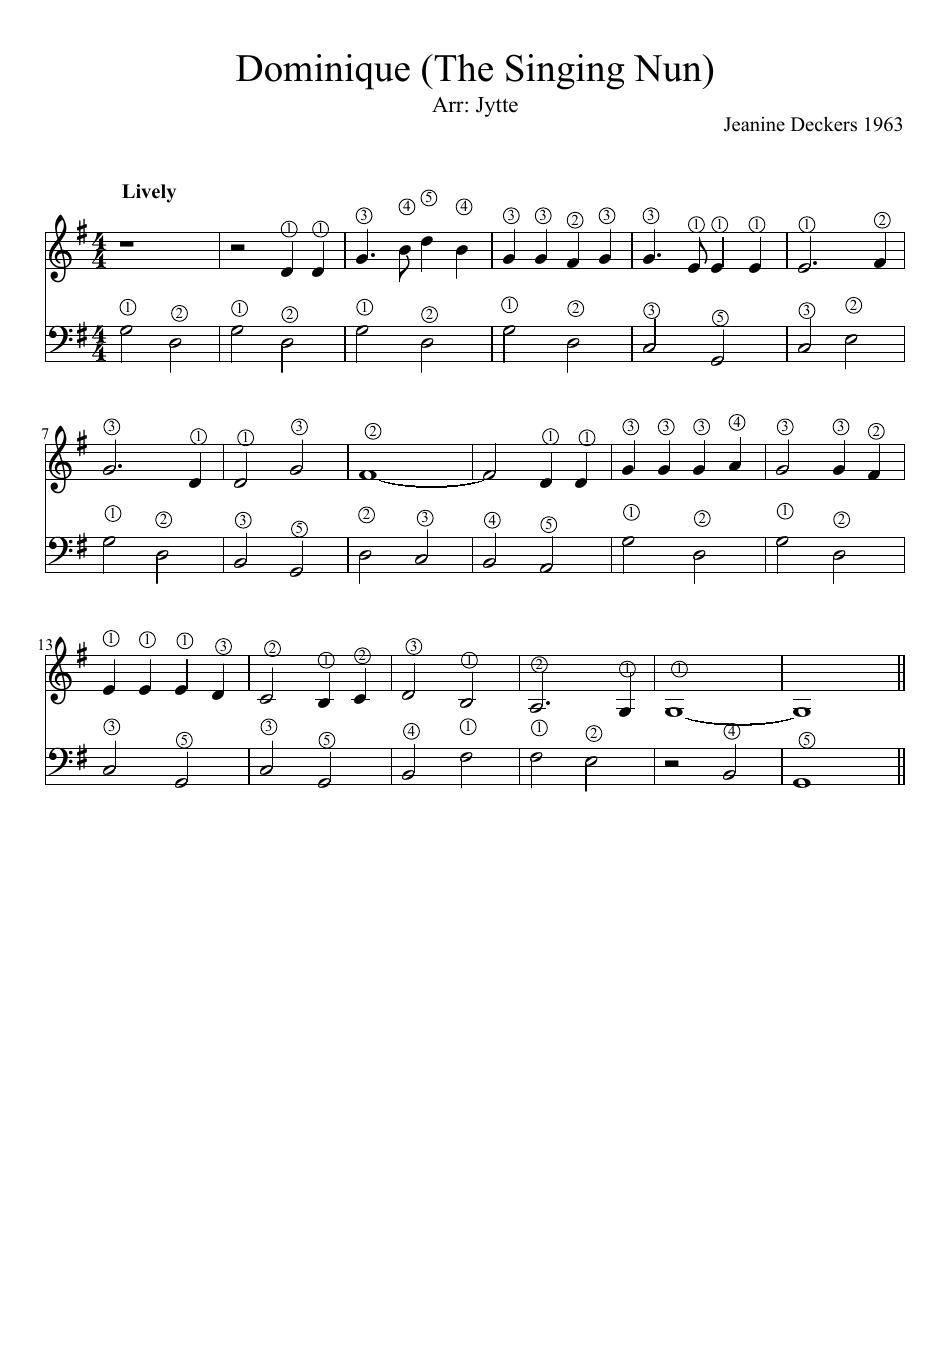 Jeanine Deckers - Dominique (The Singing Nun) Sheet Music